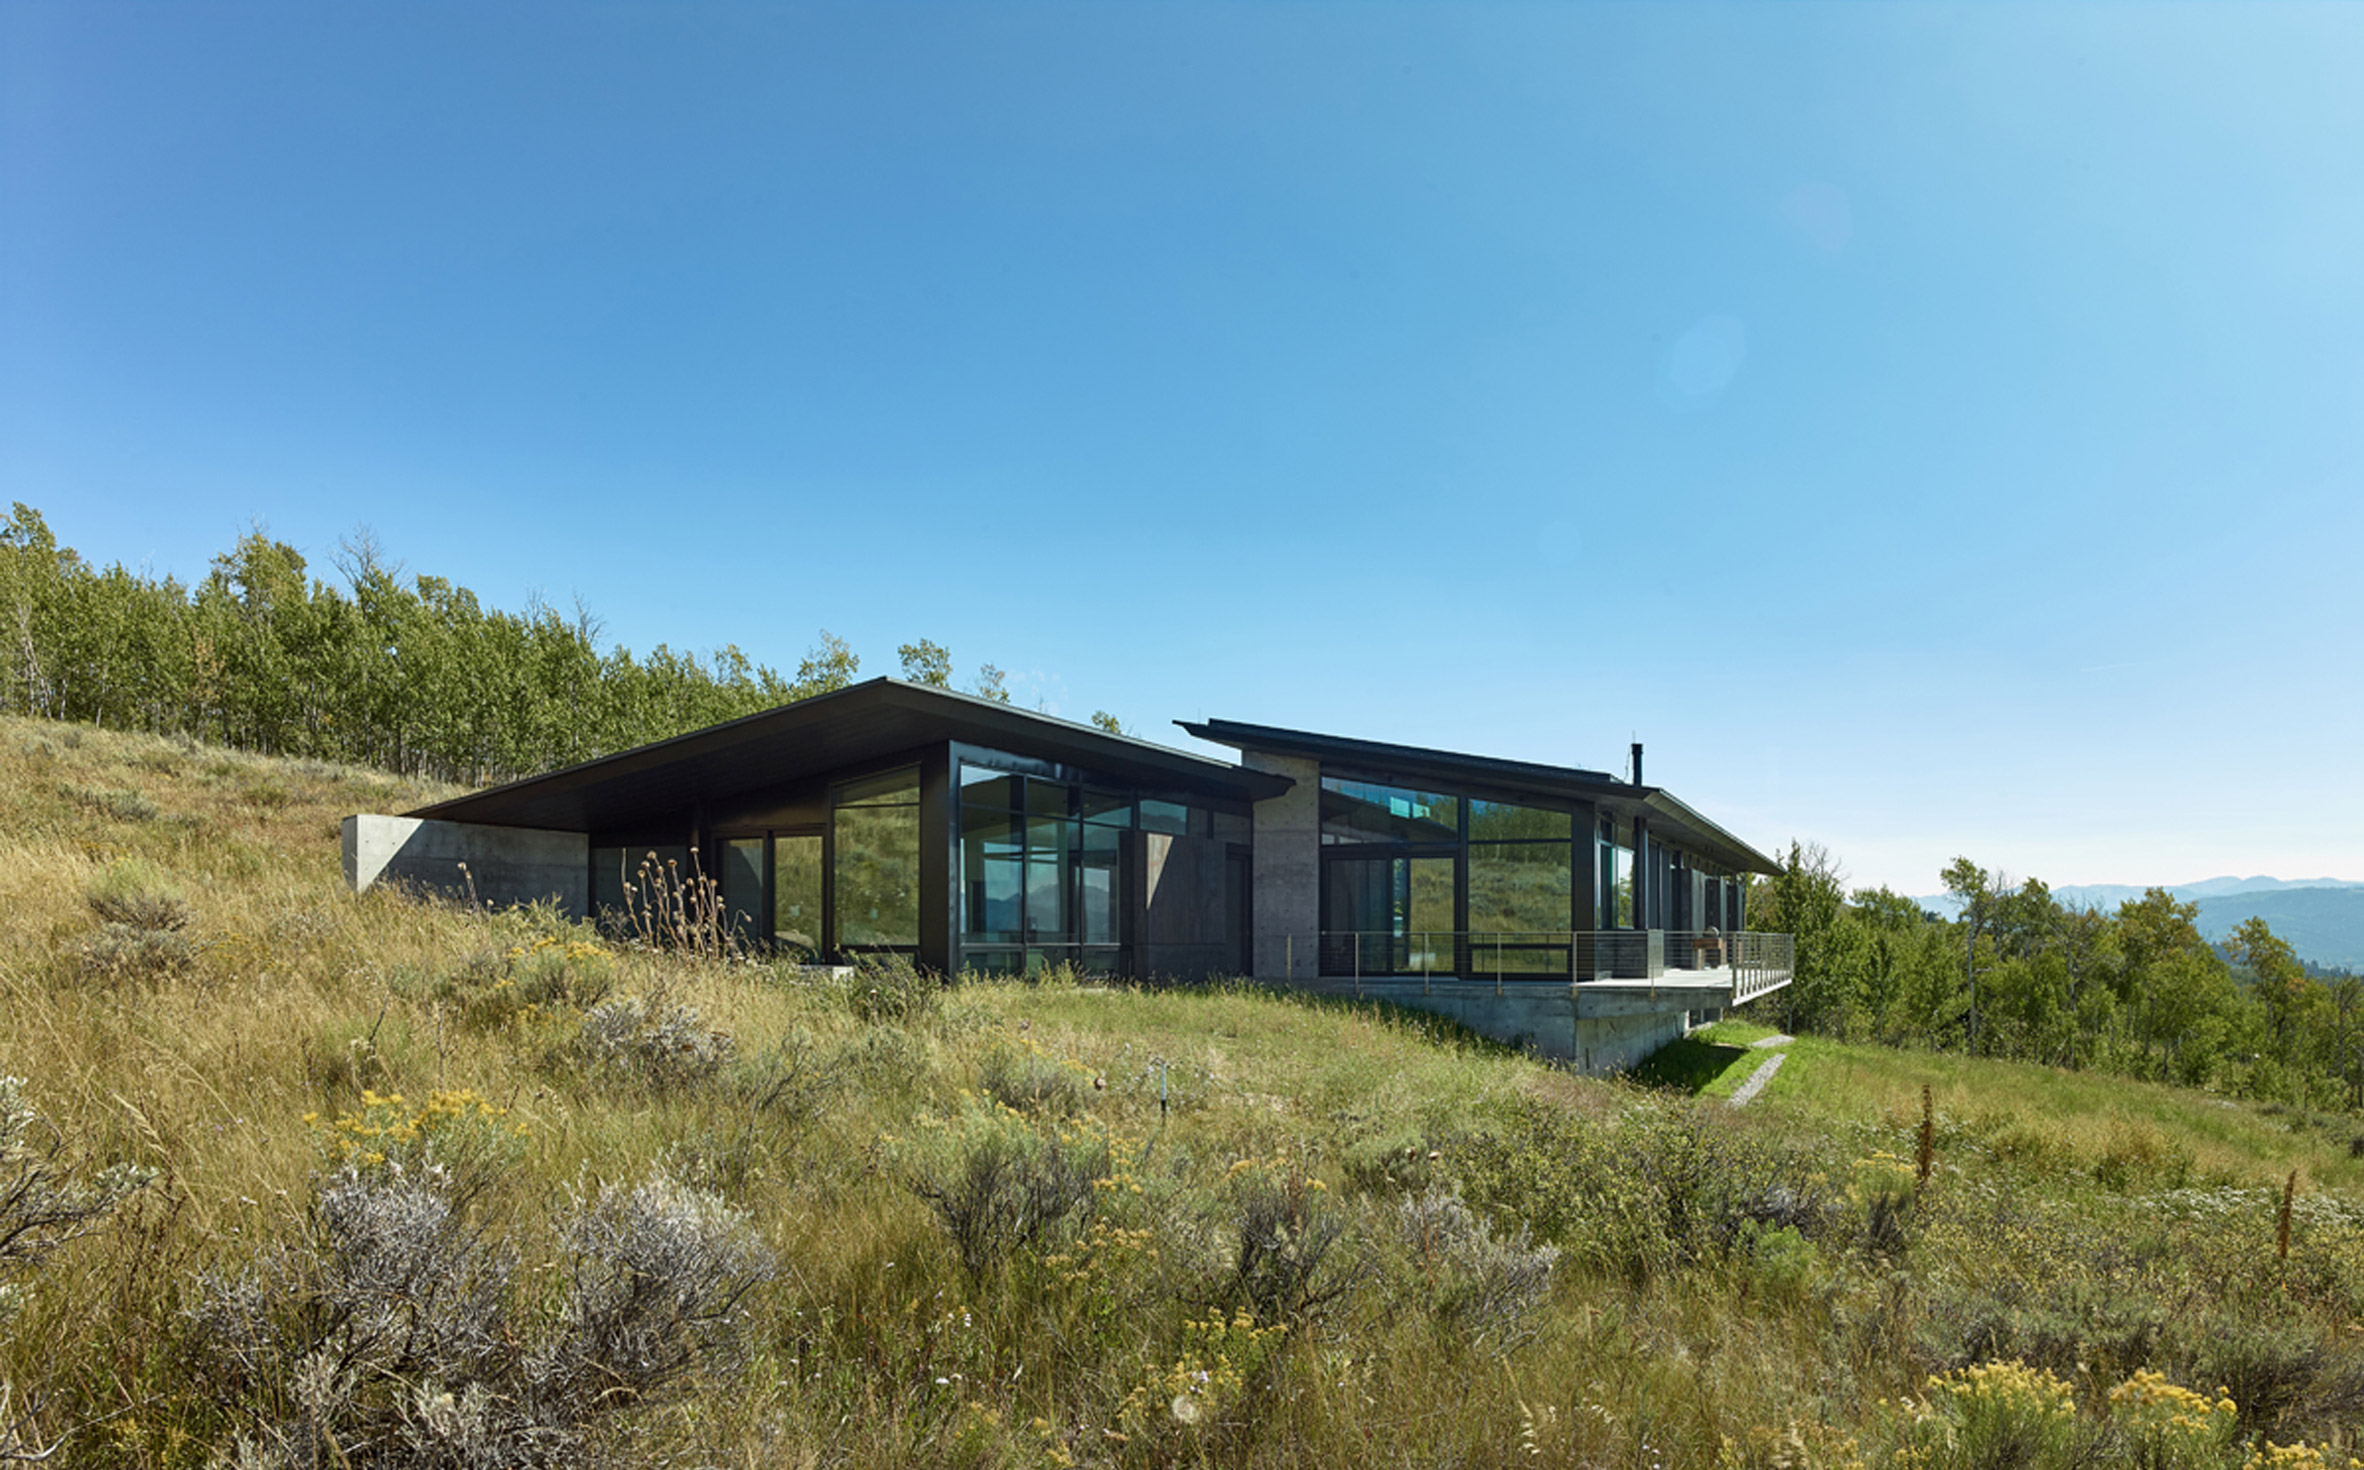 wyoming-residence-abramson-teiger-architects-architecture-residential_dezeen_2364_col_8